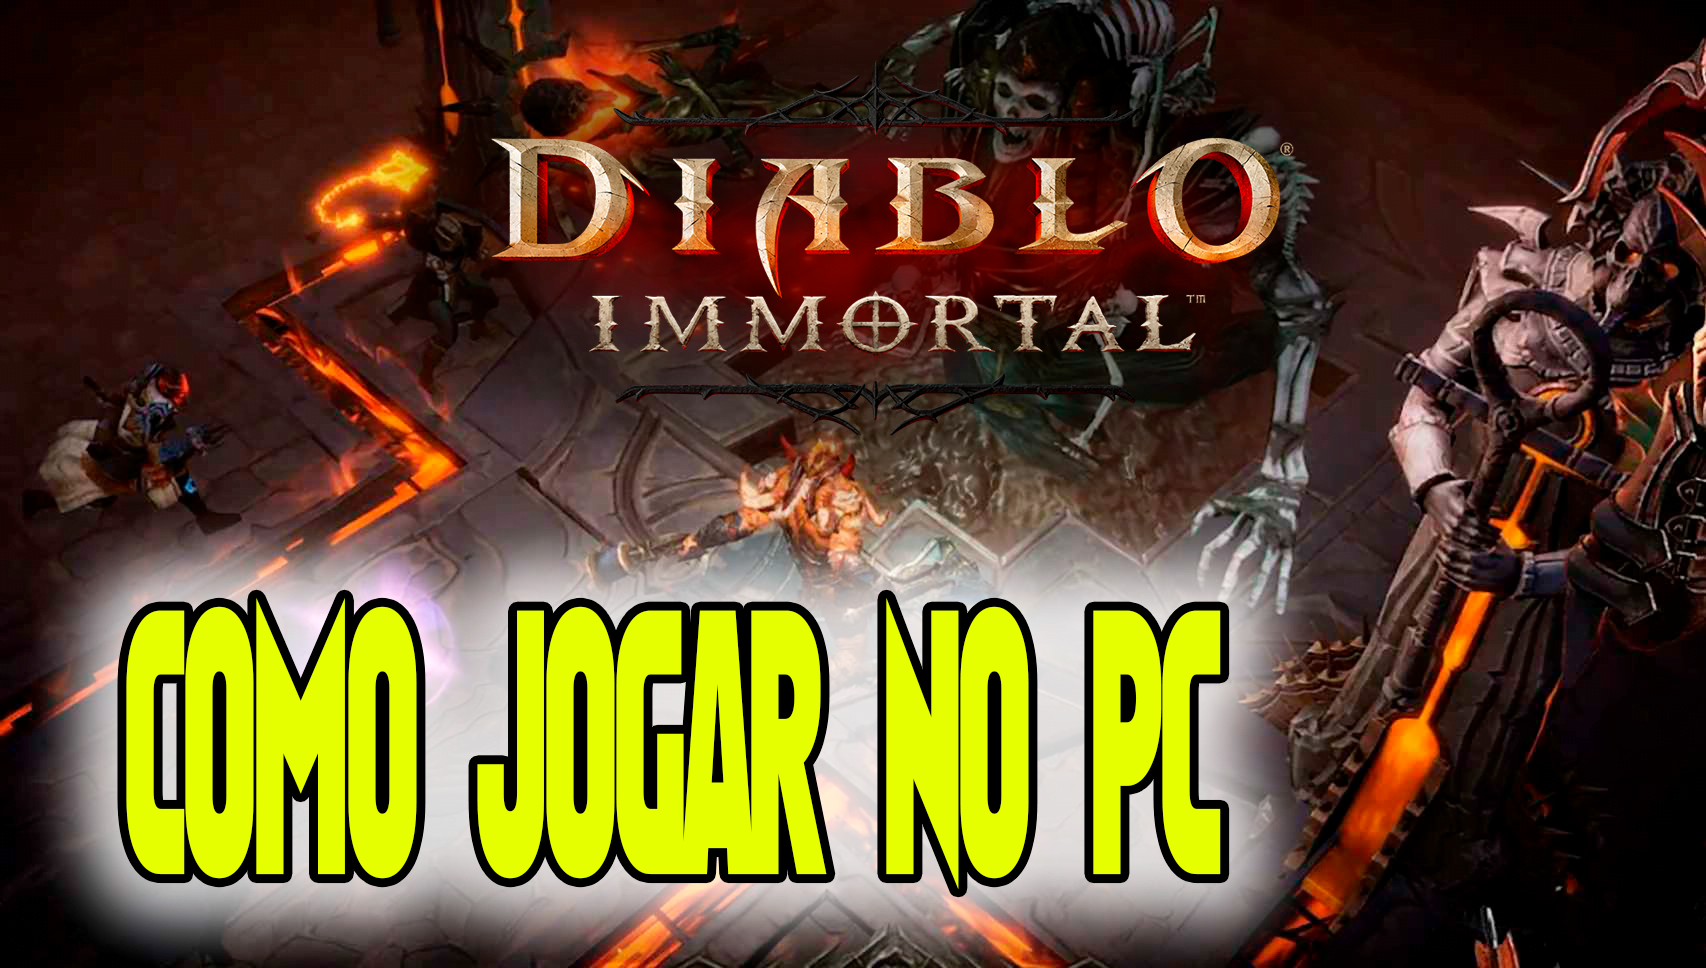 Diablo Immortal will be released on June 2 the gates